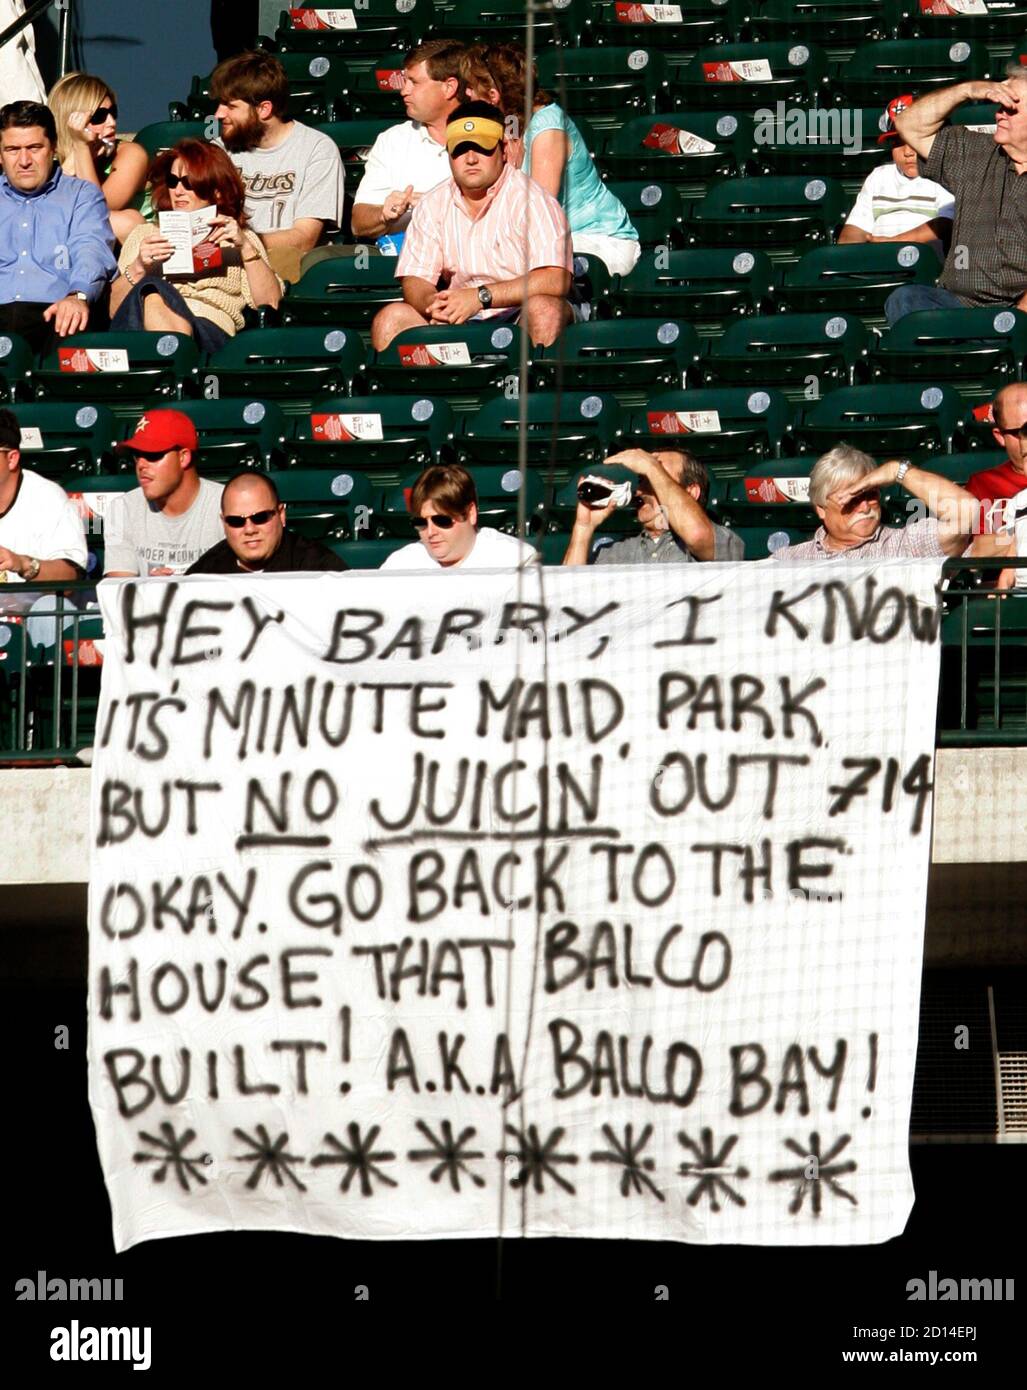 A sign hangs in Minute Maid park referring to San Francisco Giants Barry Bonds during the 1st inning of National League baseball action against Houston Astros in Houston, May 17, 2006. Bonds was not in the lineup for the game. REUTERS/Rick Wilking Stock Photo